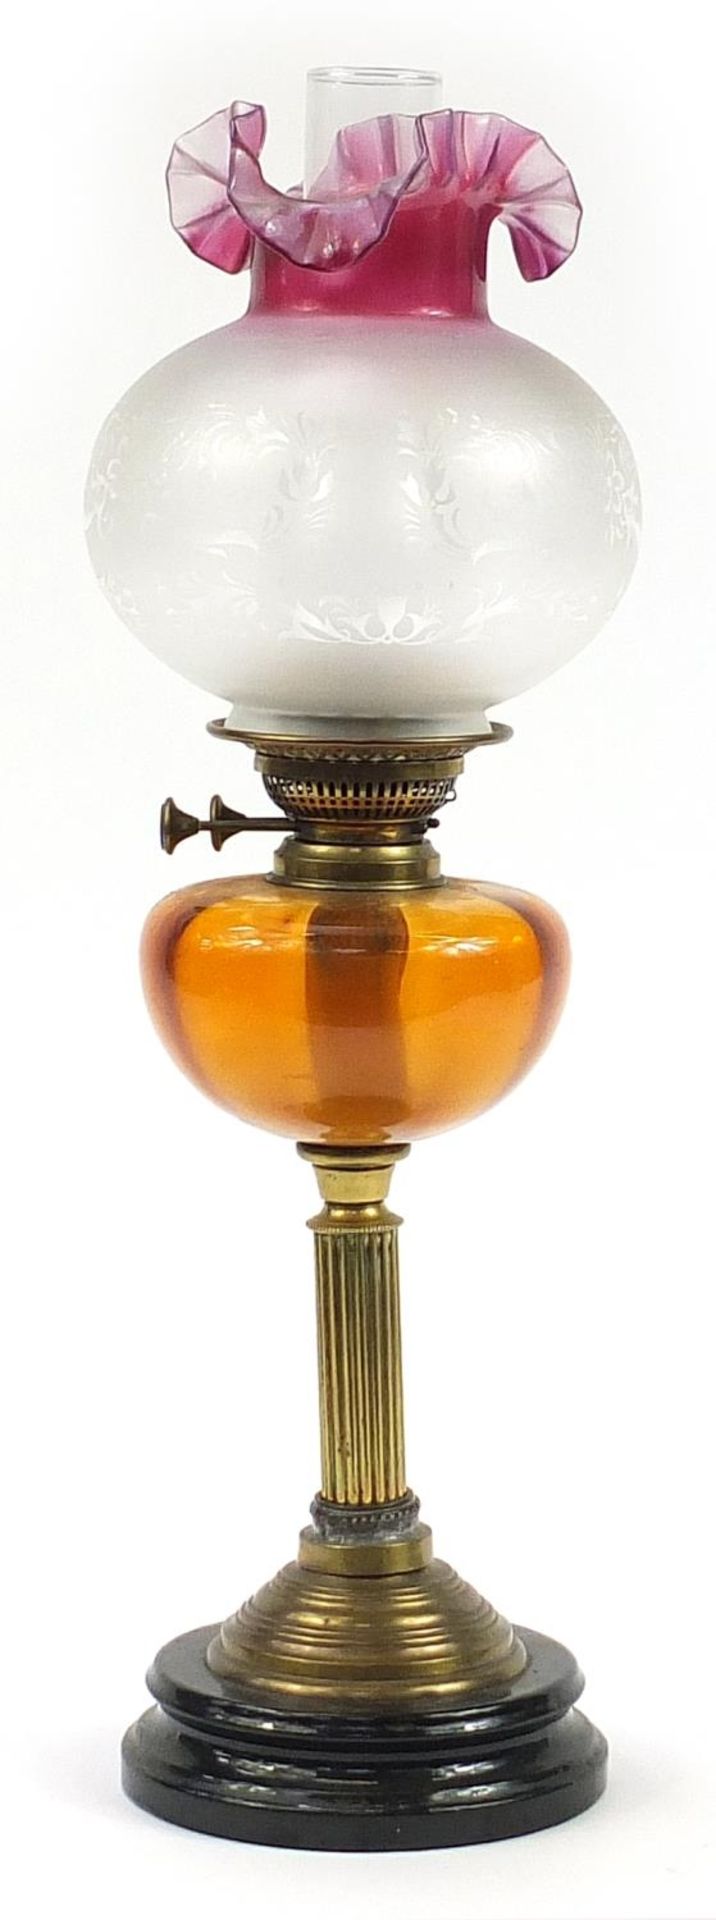 Victorian brass oil lamp with amber glass reservoir and cranberry glass shade, 63cm high